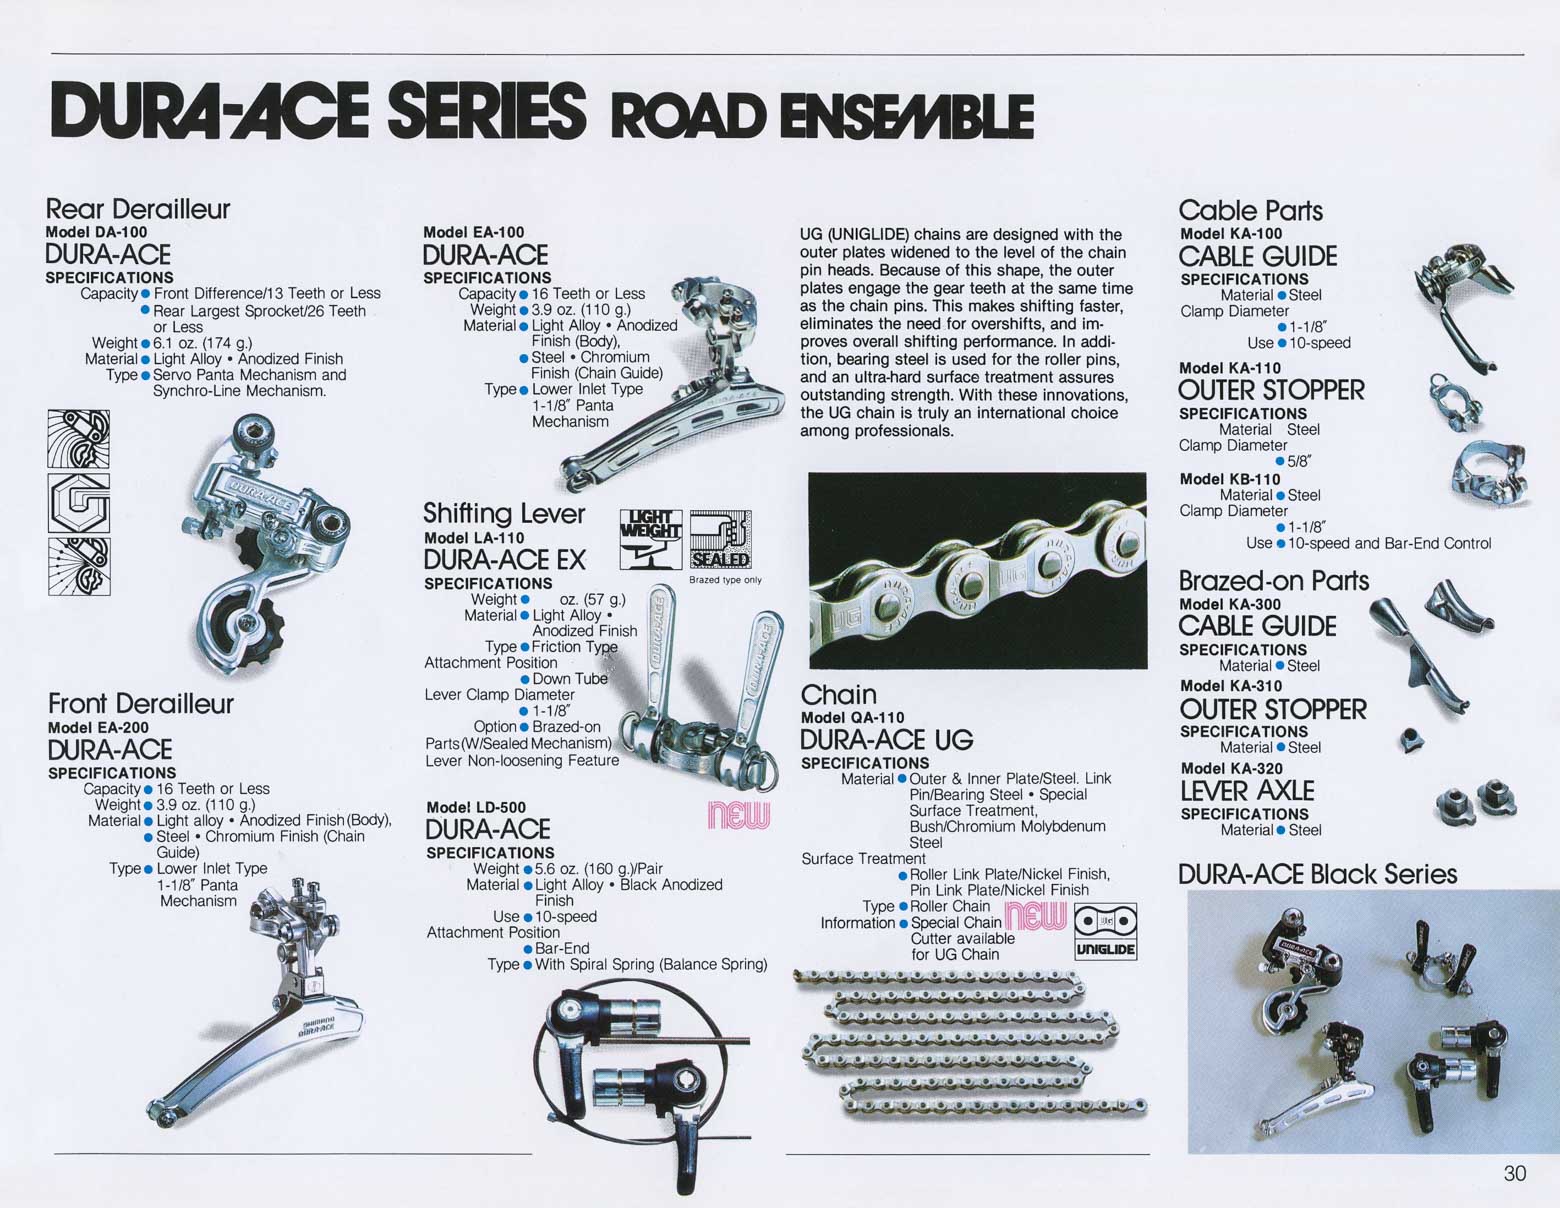 Shimano Bicycle System Components (December 1978) page 30 main image